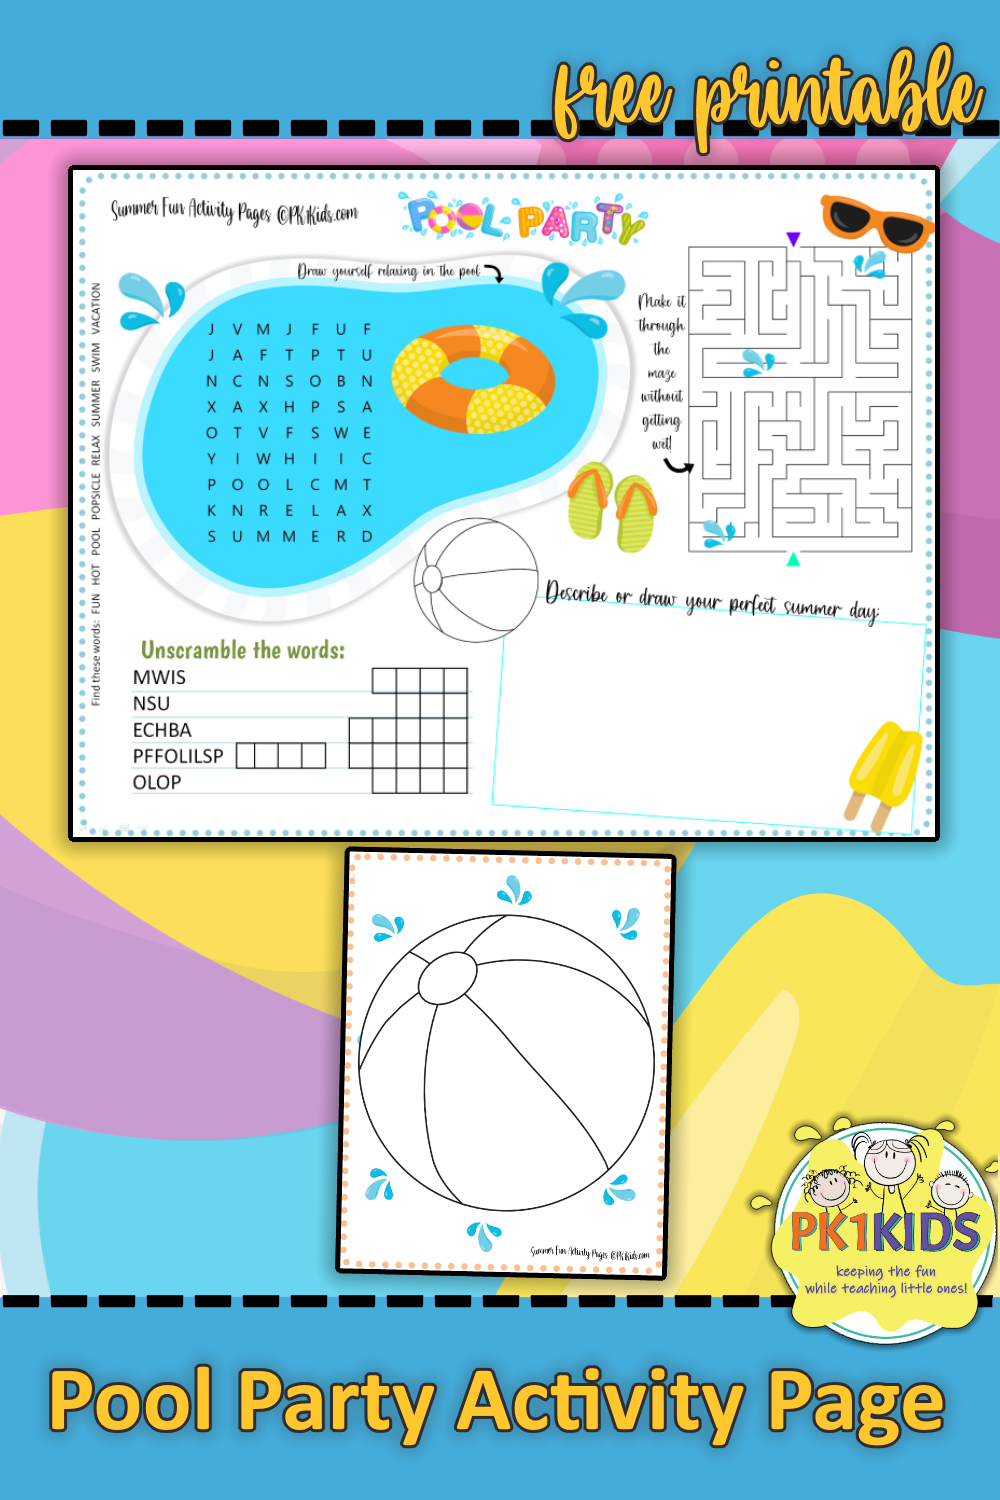 Pool Party Activity Page and Coloring Page